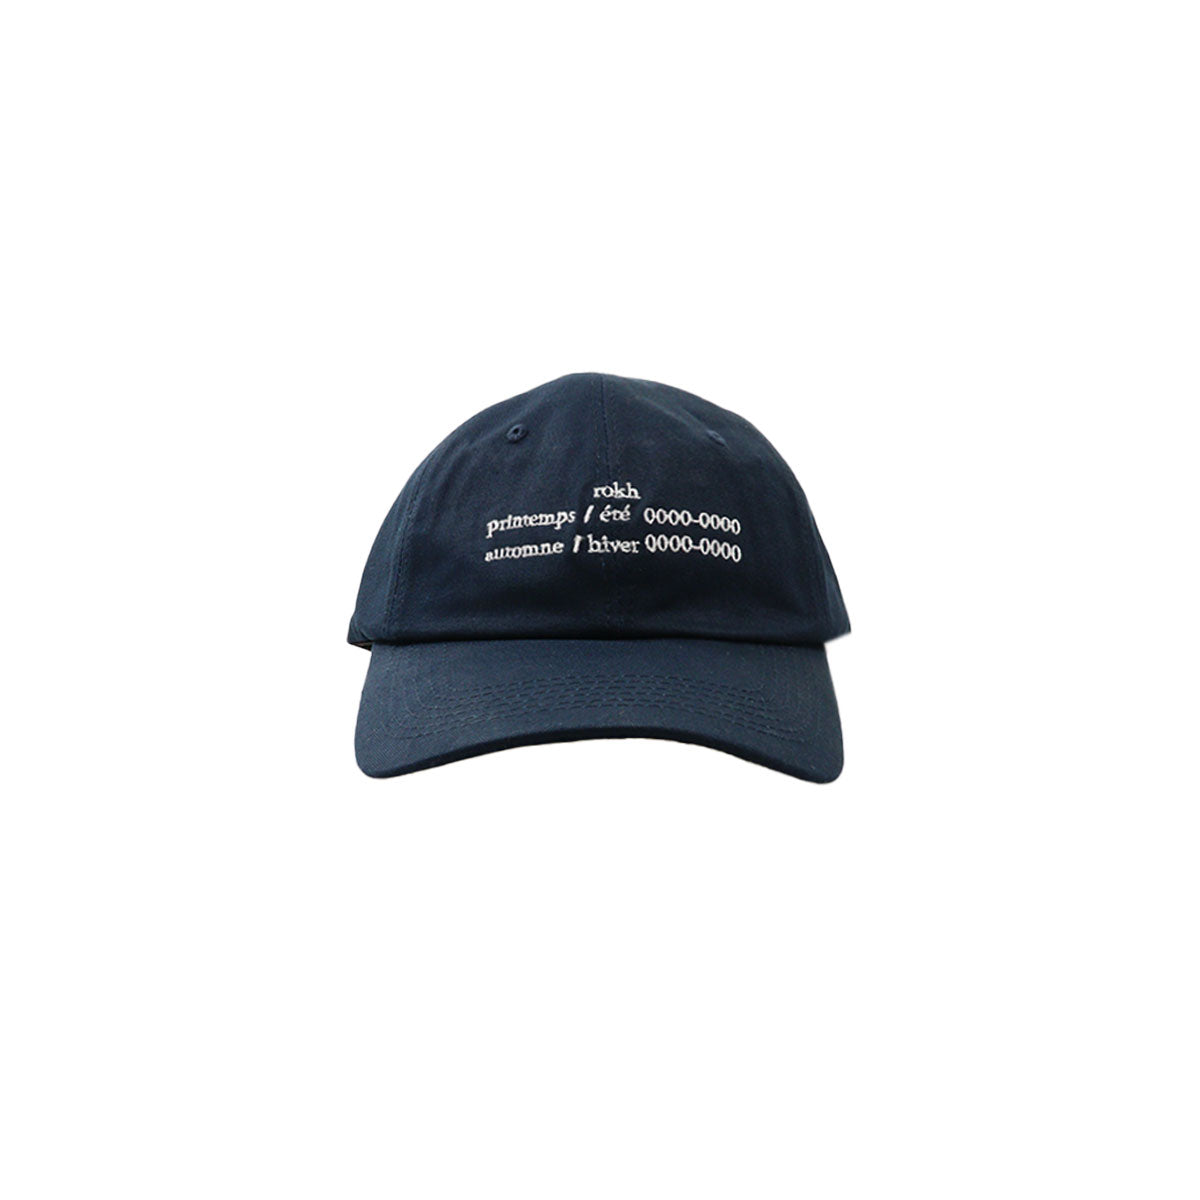 EMBROIDED ROKH LOGO CAP - Why are you here?